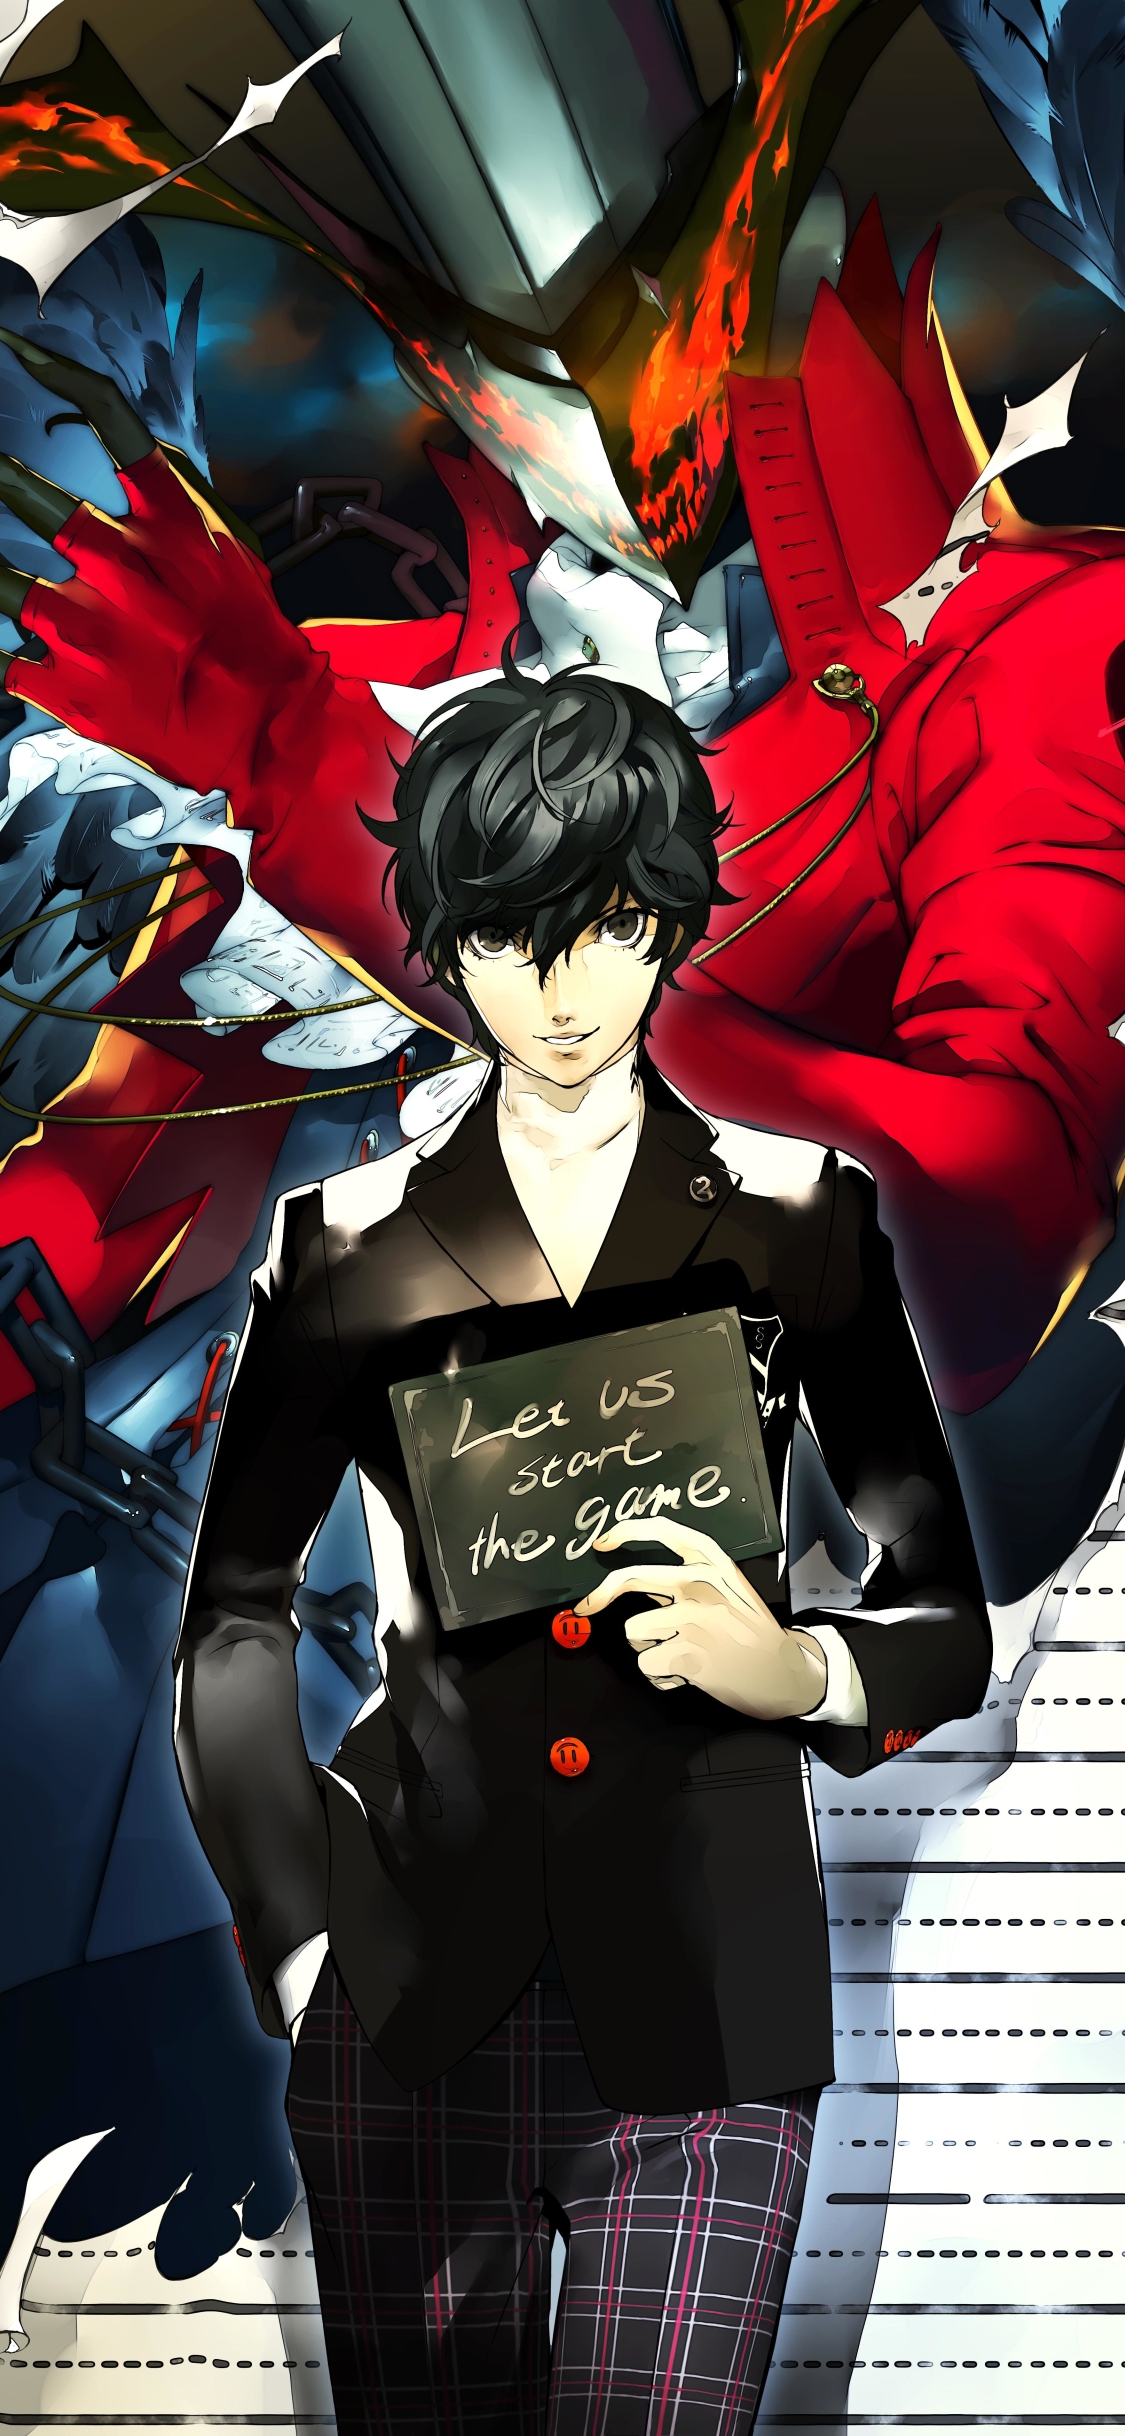 1125x2436 Persona 5 Iphone Xs Iphone 10 Iphone X Wallpaper Hd Games 4k Wallpapers Images Photos And Background Wallpapers Den